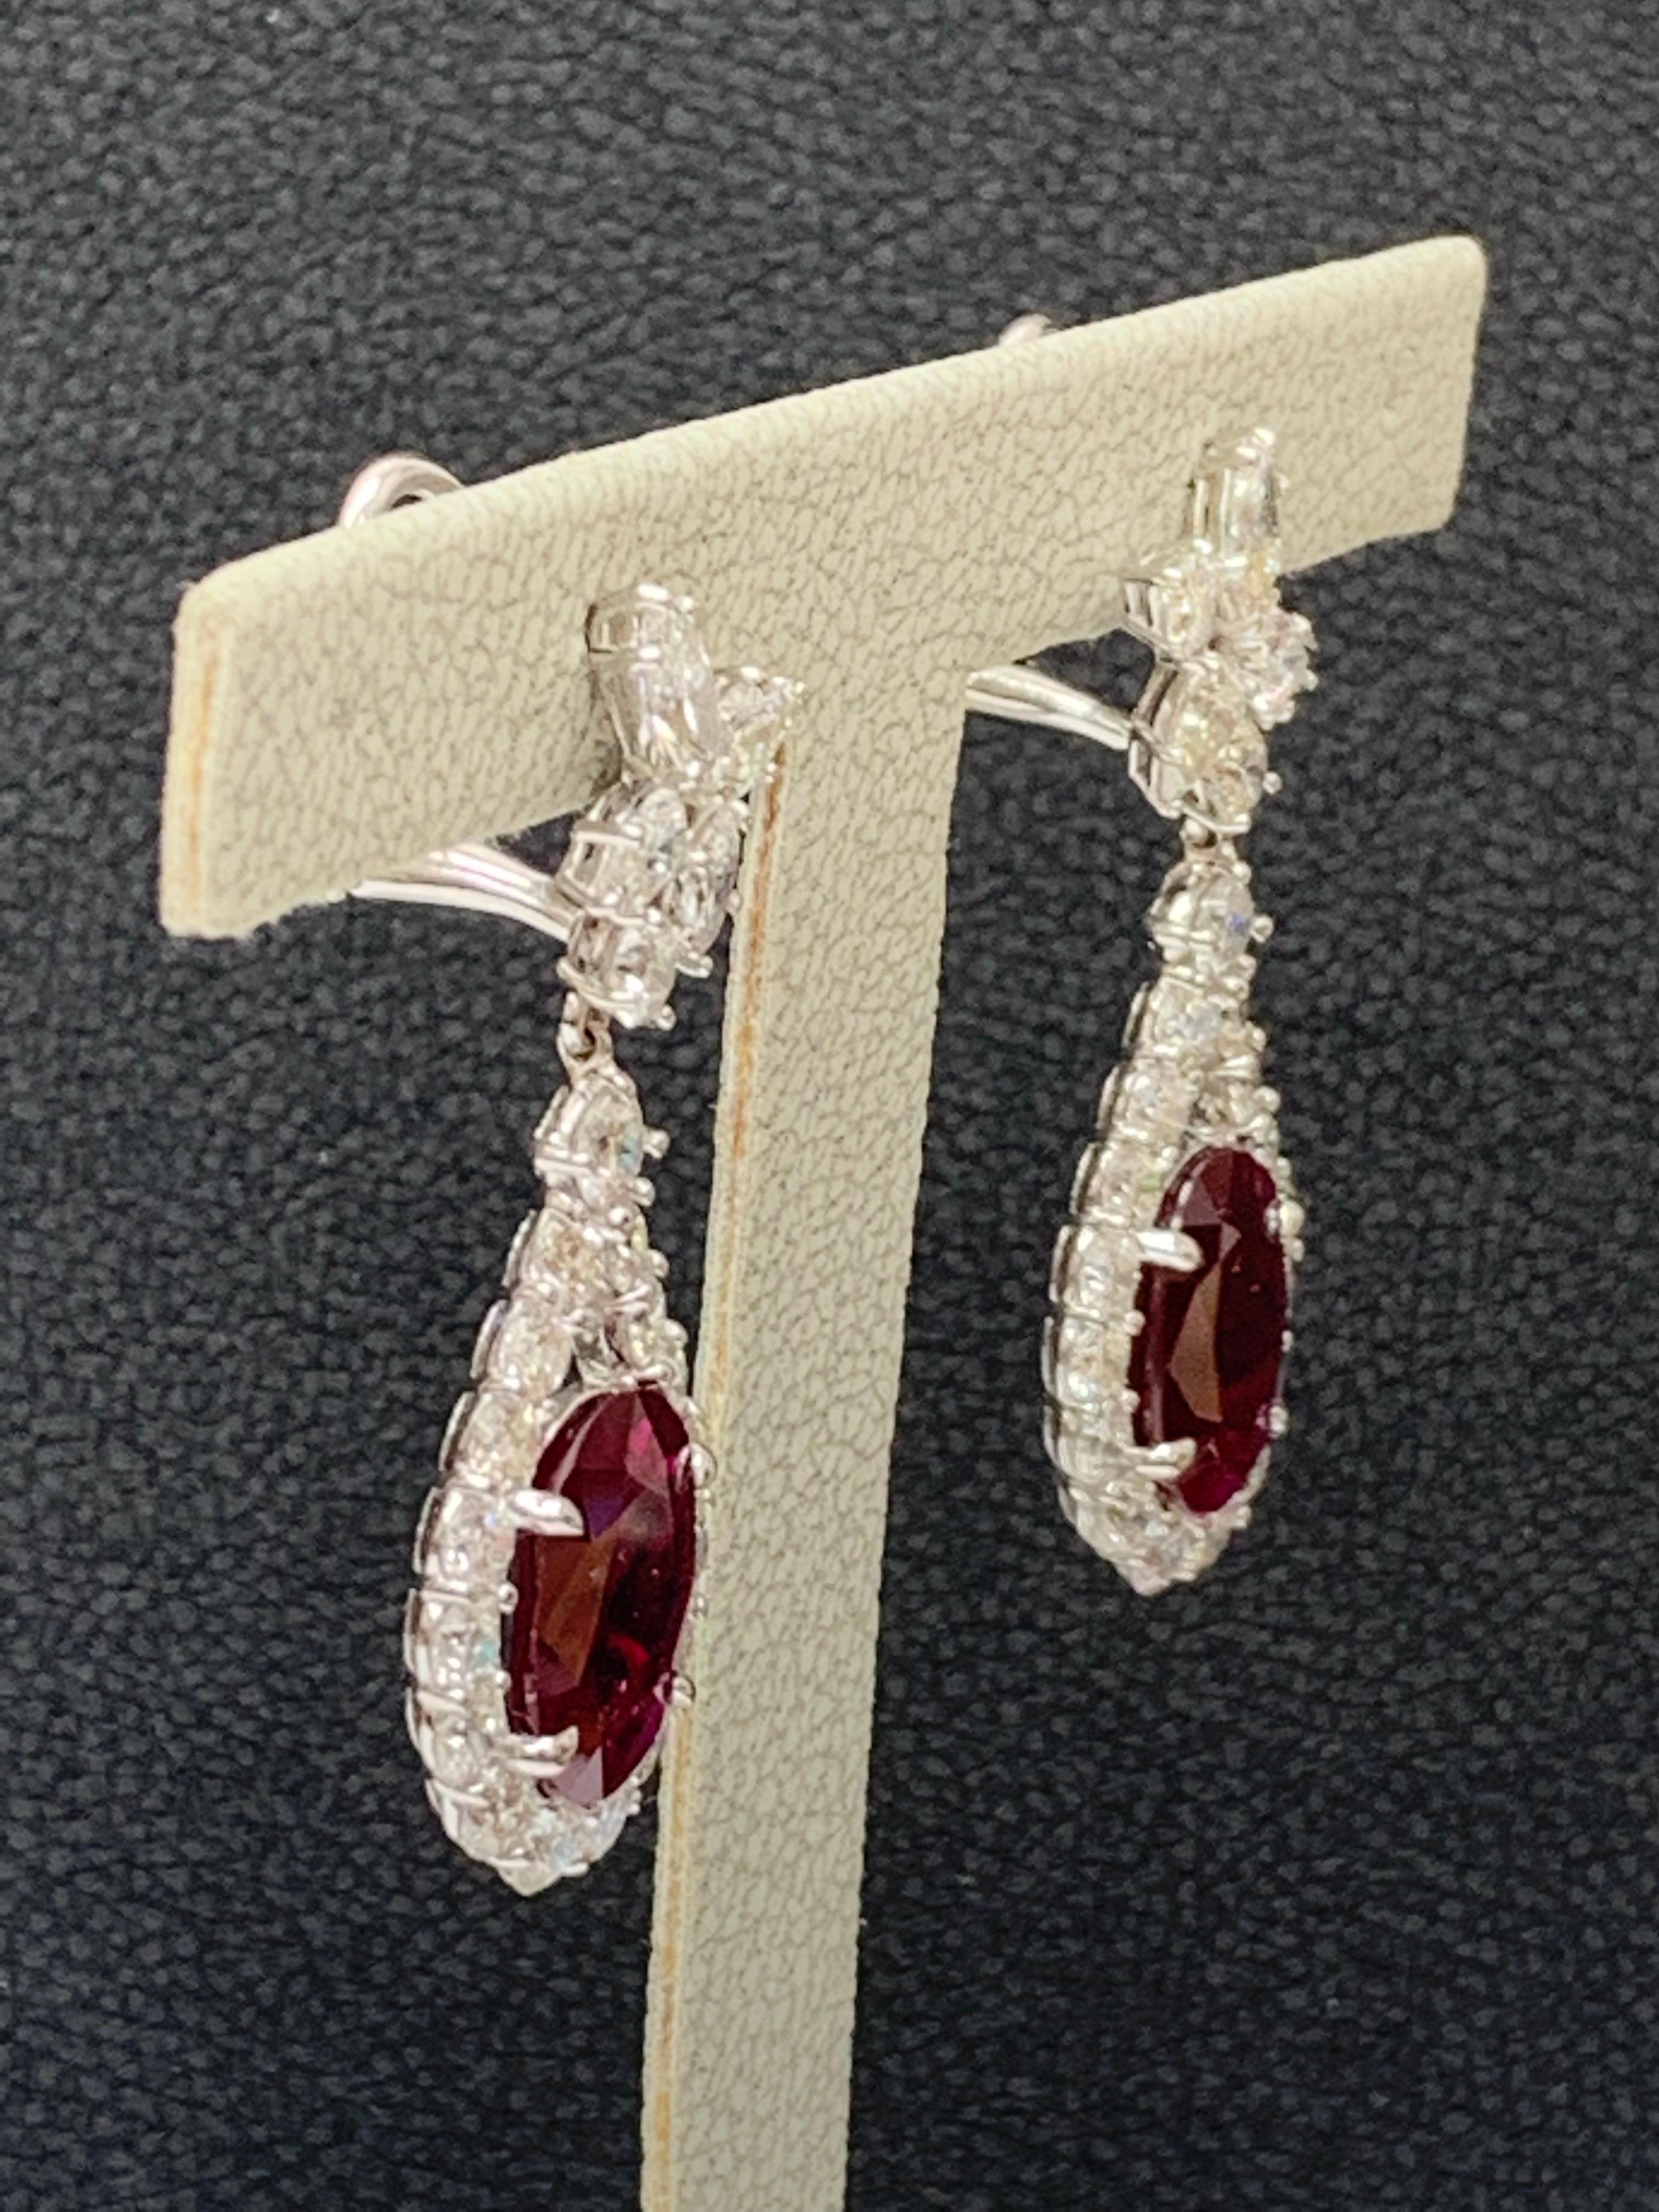 Contemporary Certified 9.05 Carat Burma Ruby and Diamond Drop Earrings in 18K White Gold For Sale